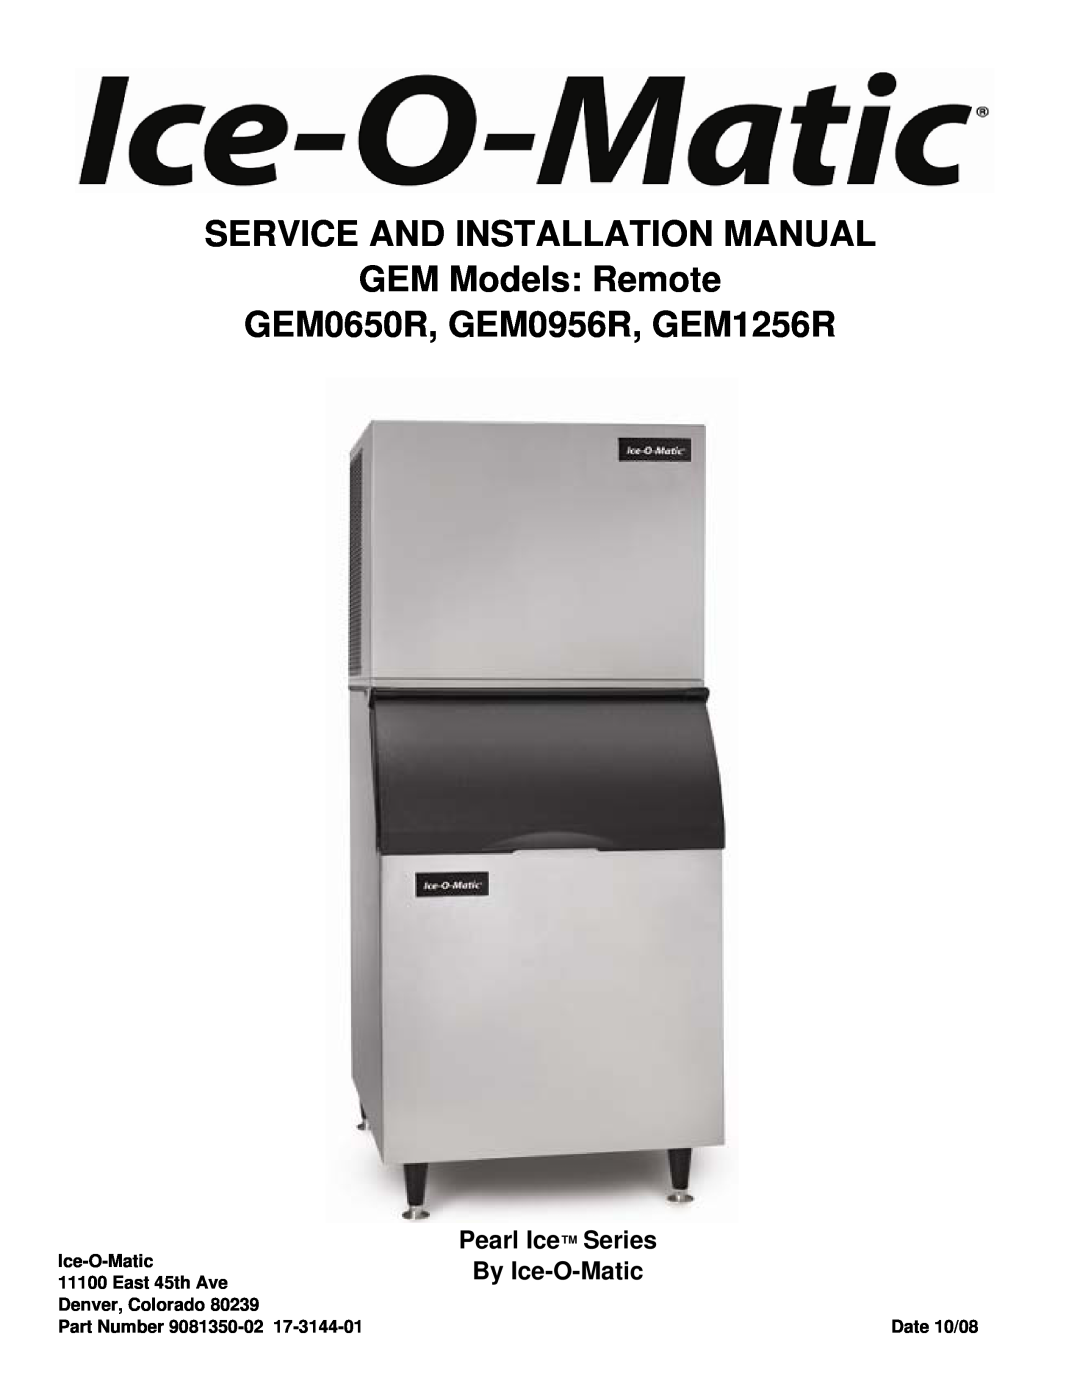 Ice-O-Matic GEM0956R, GEM1256R installation manual Pearl Ice Series, By Ice-O-Matic, Service And Installation Manual 